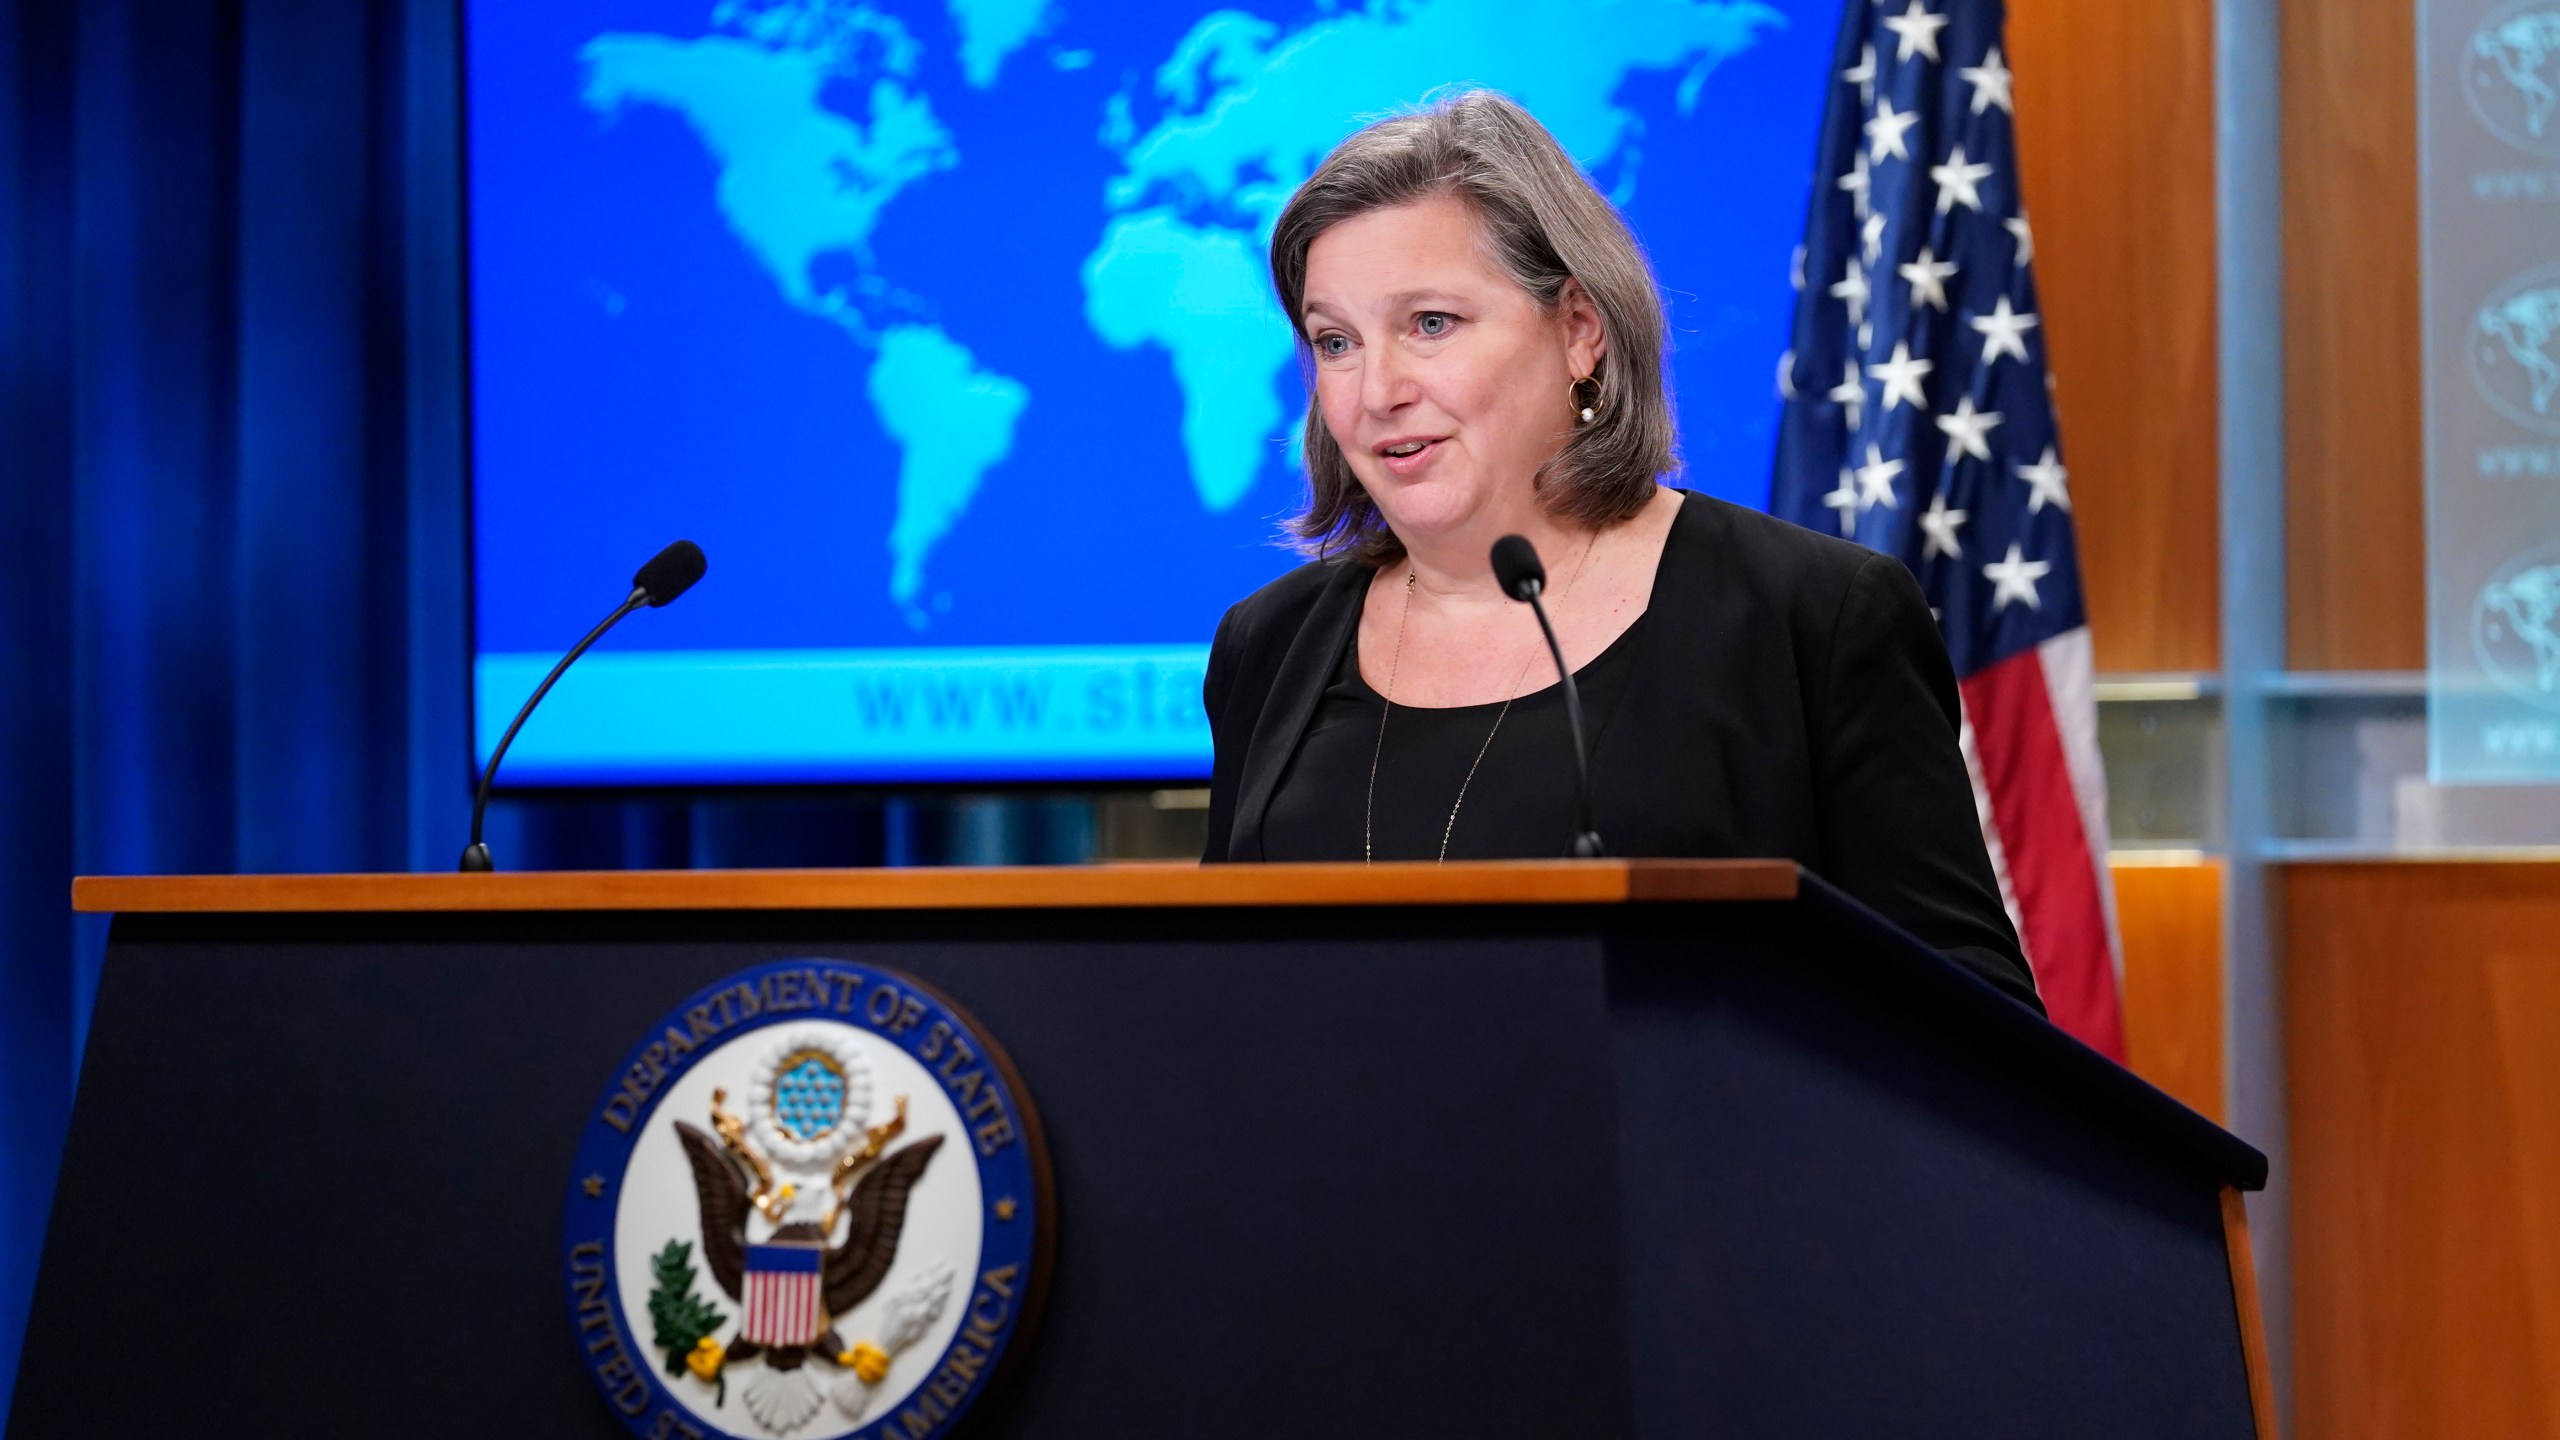 FILE - State Department Under Secretary for Public Affairs Victoria J. Nuland speaks during a briefing at the State Department in Washington, Jan. 27, 2022. Nuland, the third-highest ranking U.S. diplomat and frequent target of criticism for her hawkish views on Russia and its actions in Ukraine, will leave her post this month, the State Department said Tuesday. (AP Photo/Susan Walsh, Pool, File)